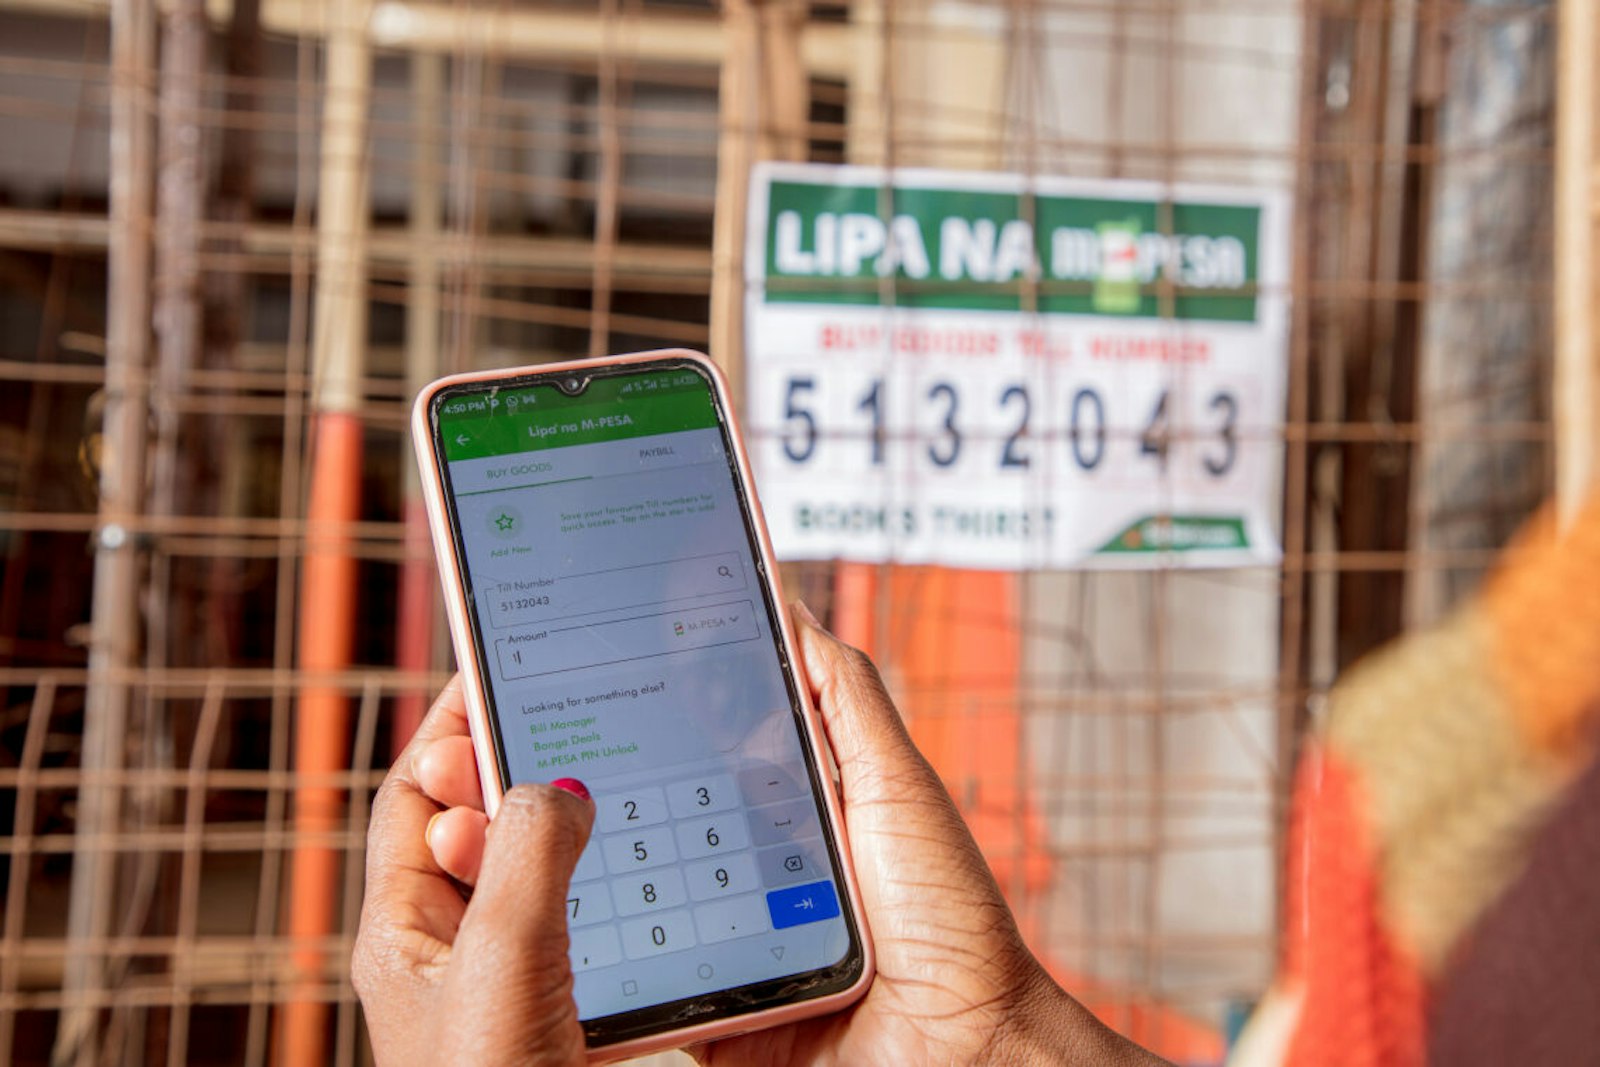 Africa's most successful mobile money service, M-PESA, is helping small business Book Thirst to grow. Find out more.